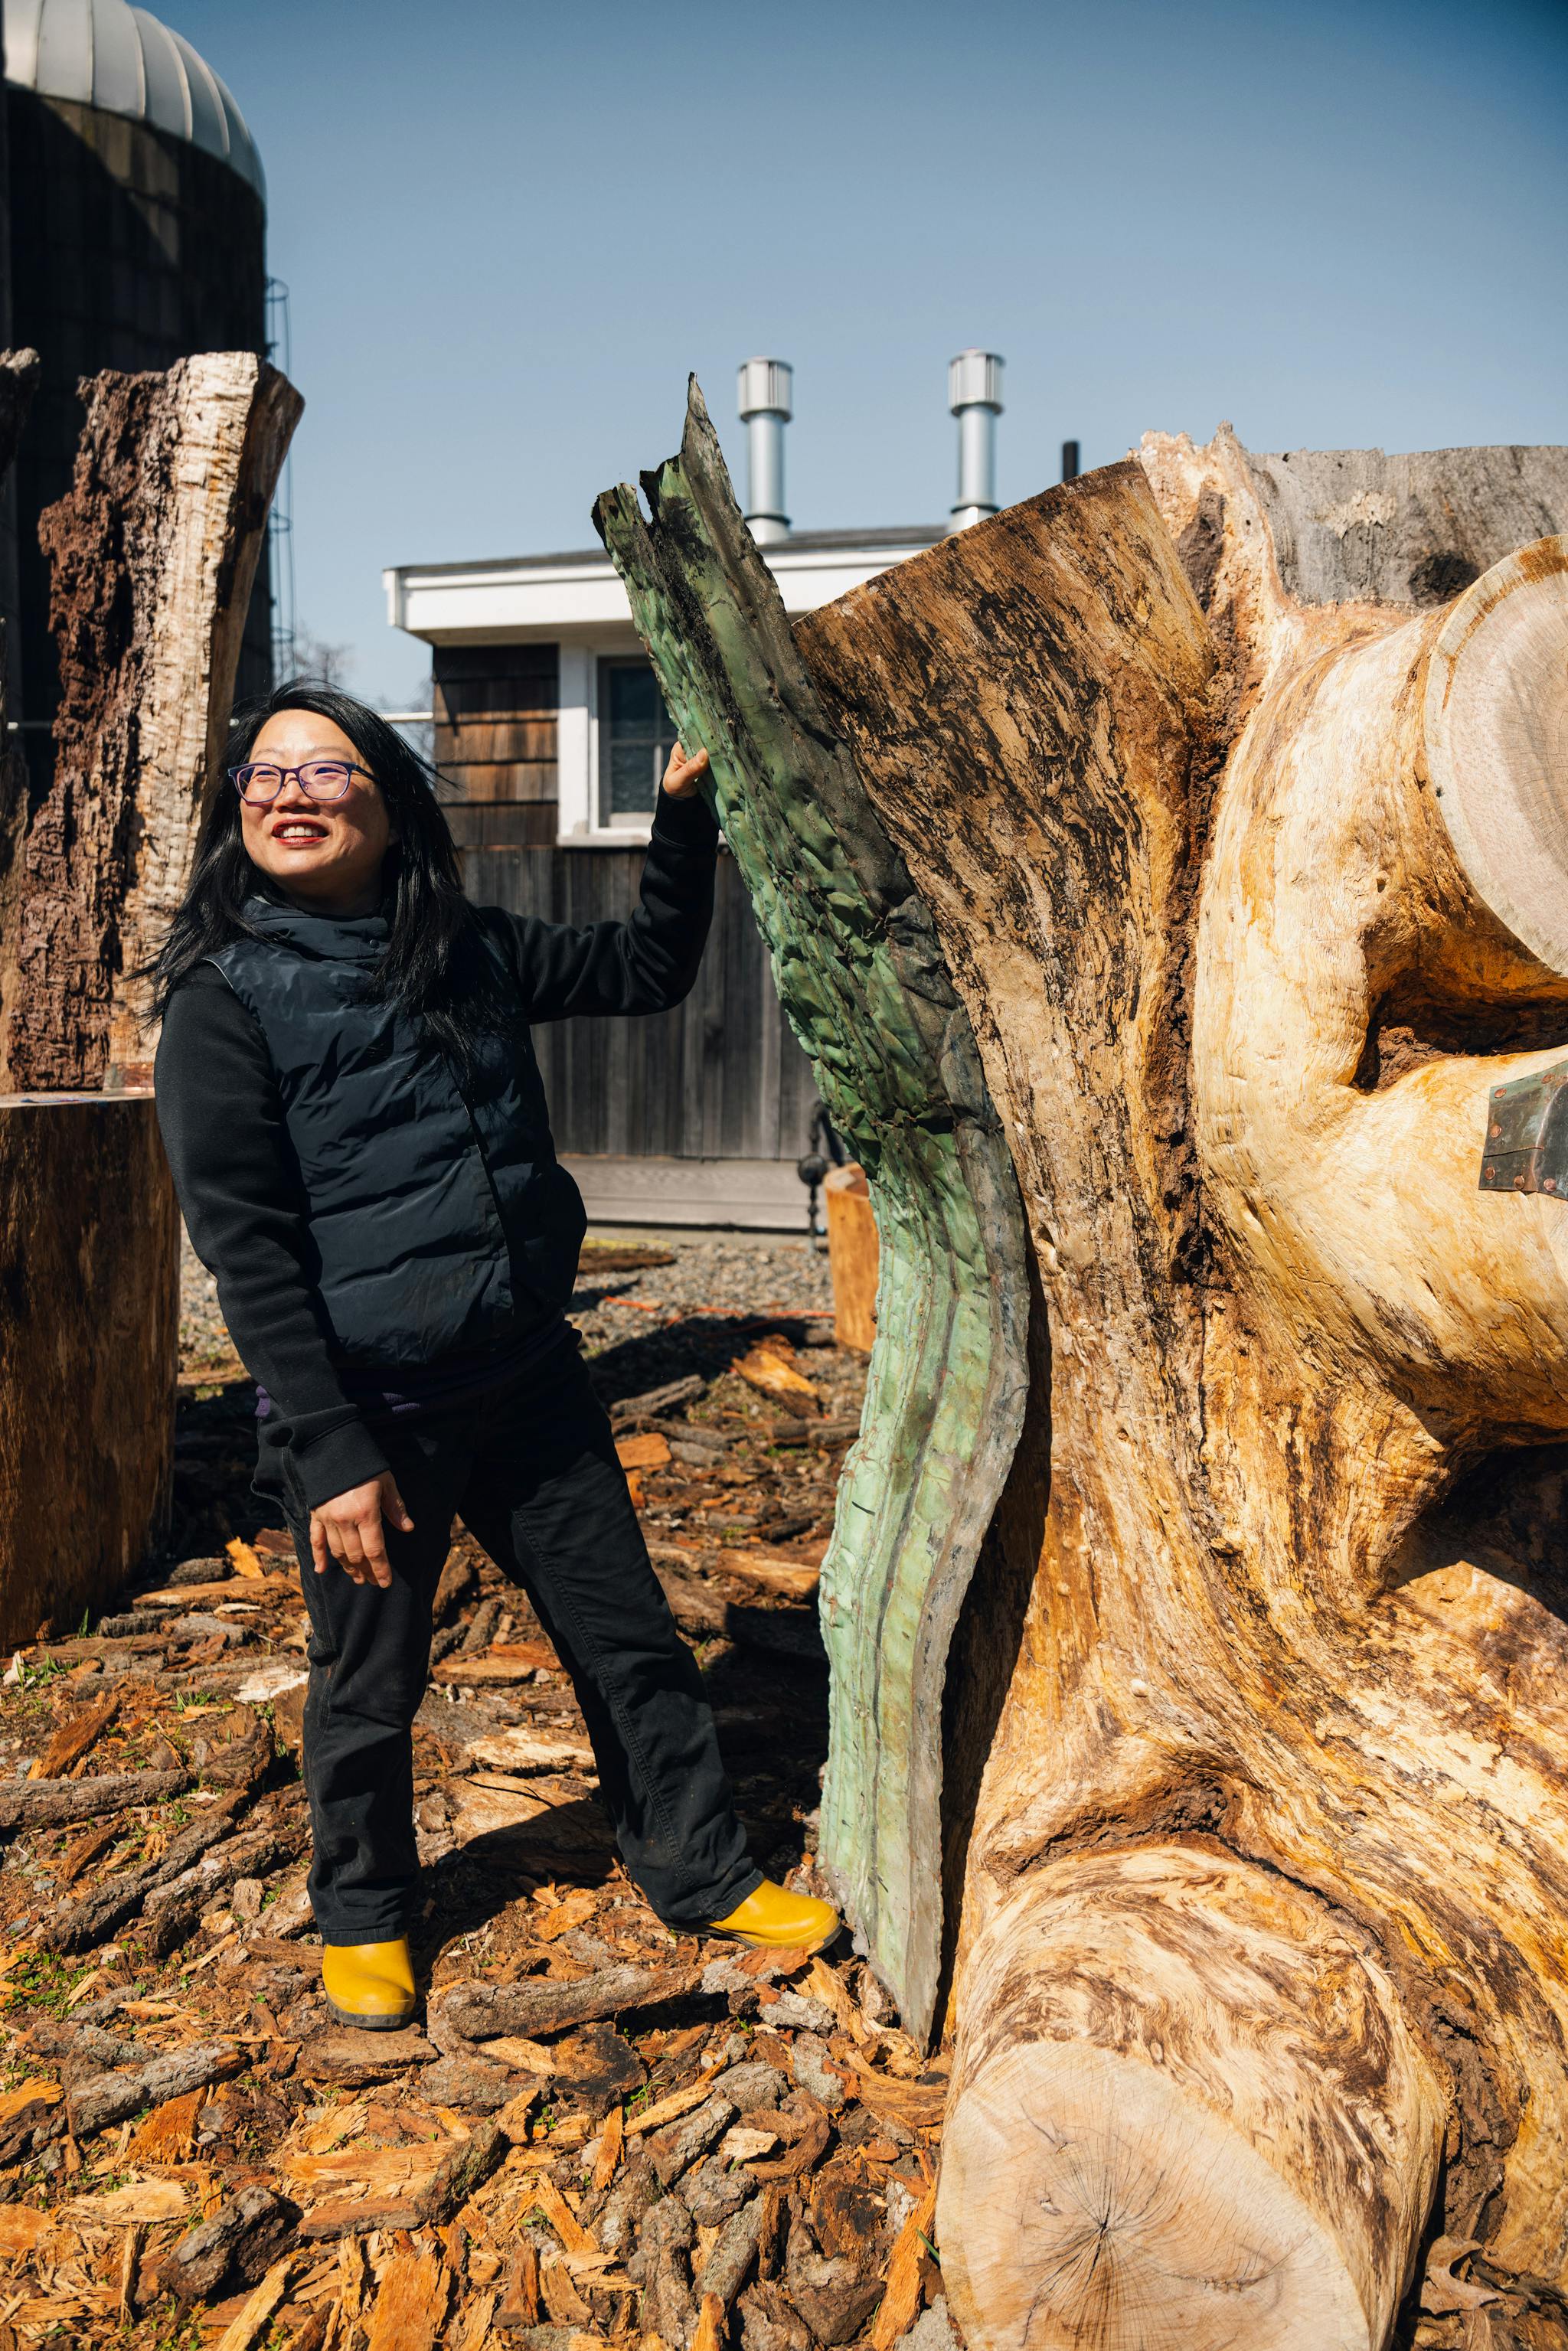 Korean American artist Jean Shin stands beside a large leaning tree stump—one of the pieces she's working on on site at Appleton Farms.